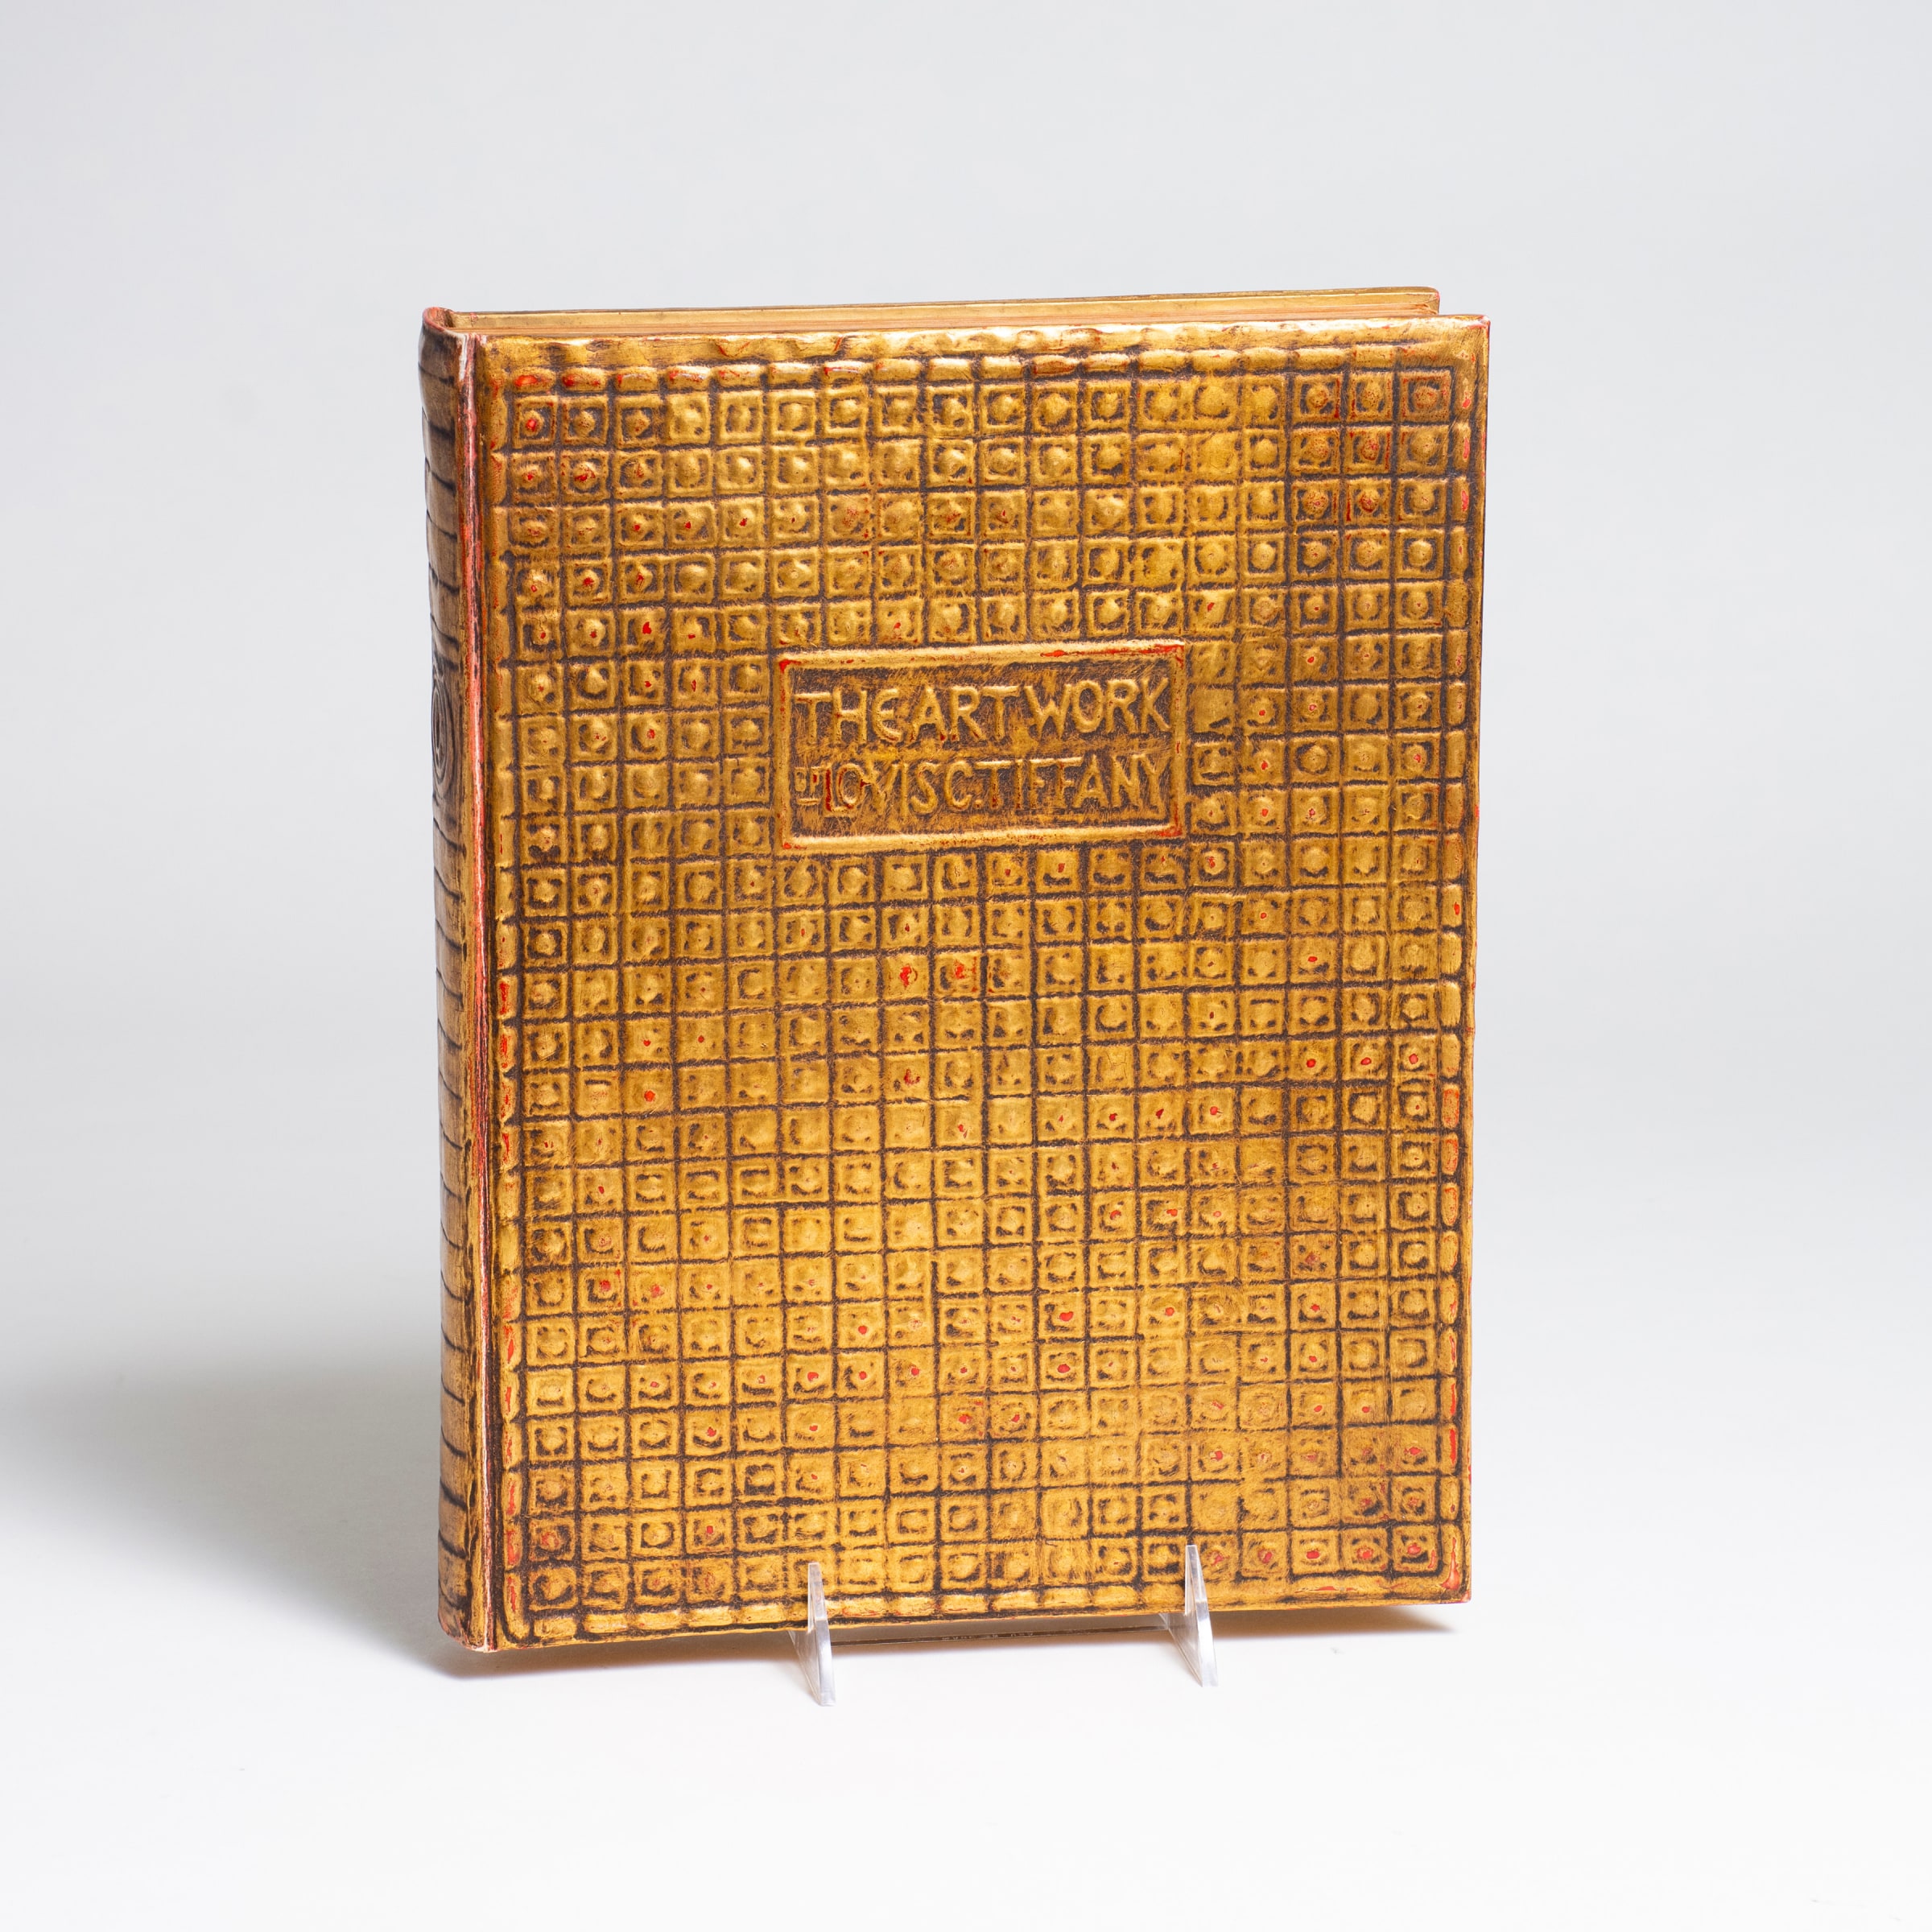 an art book, a biography by charles de kay of louis comfort tiffany, the cover in embossed gilded papier mache in a pattern of raised squares